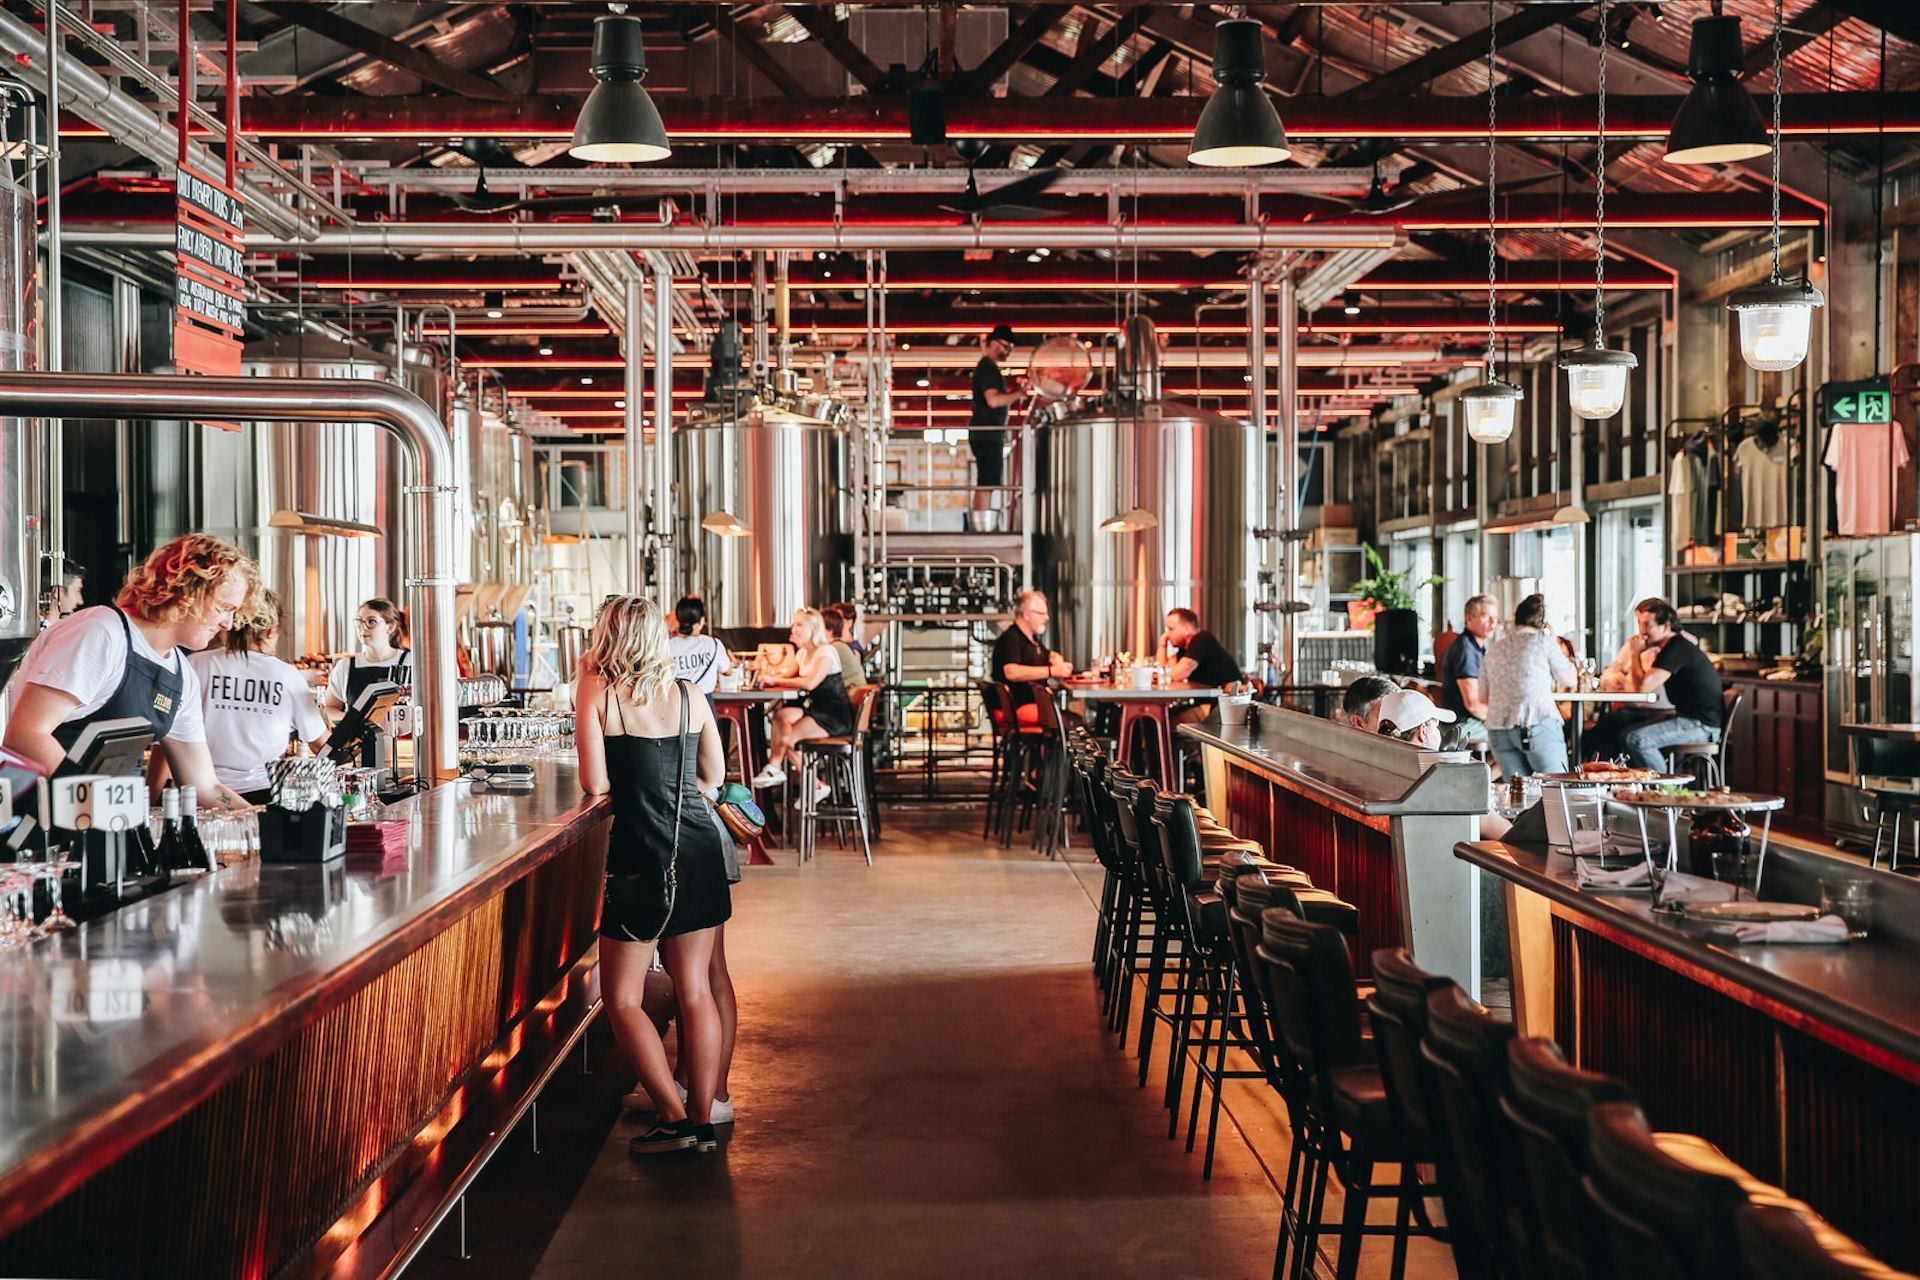 Bars run down both sides of this long, narrow brewery. Brass and stainless steel abound in this incredibly contemporary interior; people stand at the bars, others sit over tables.